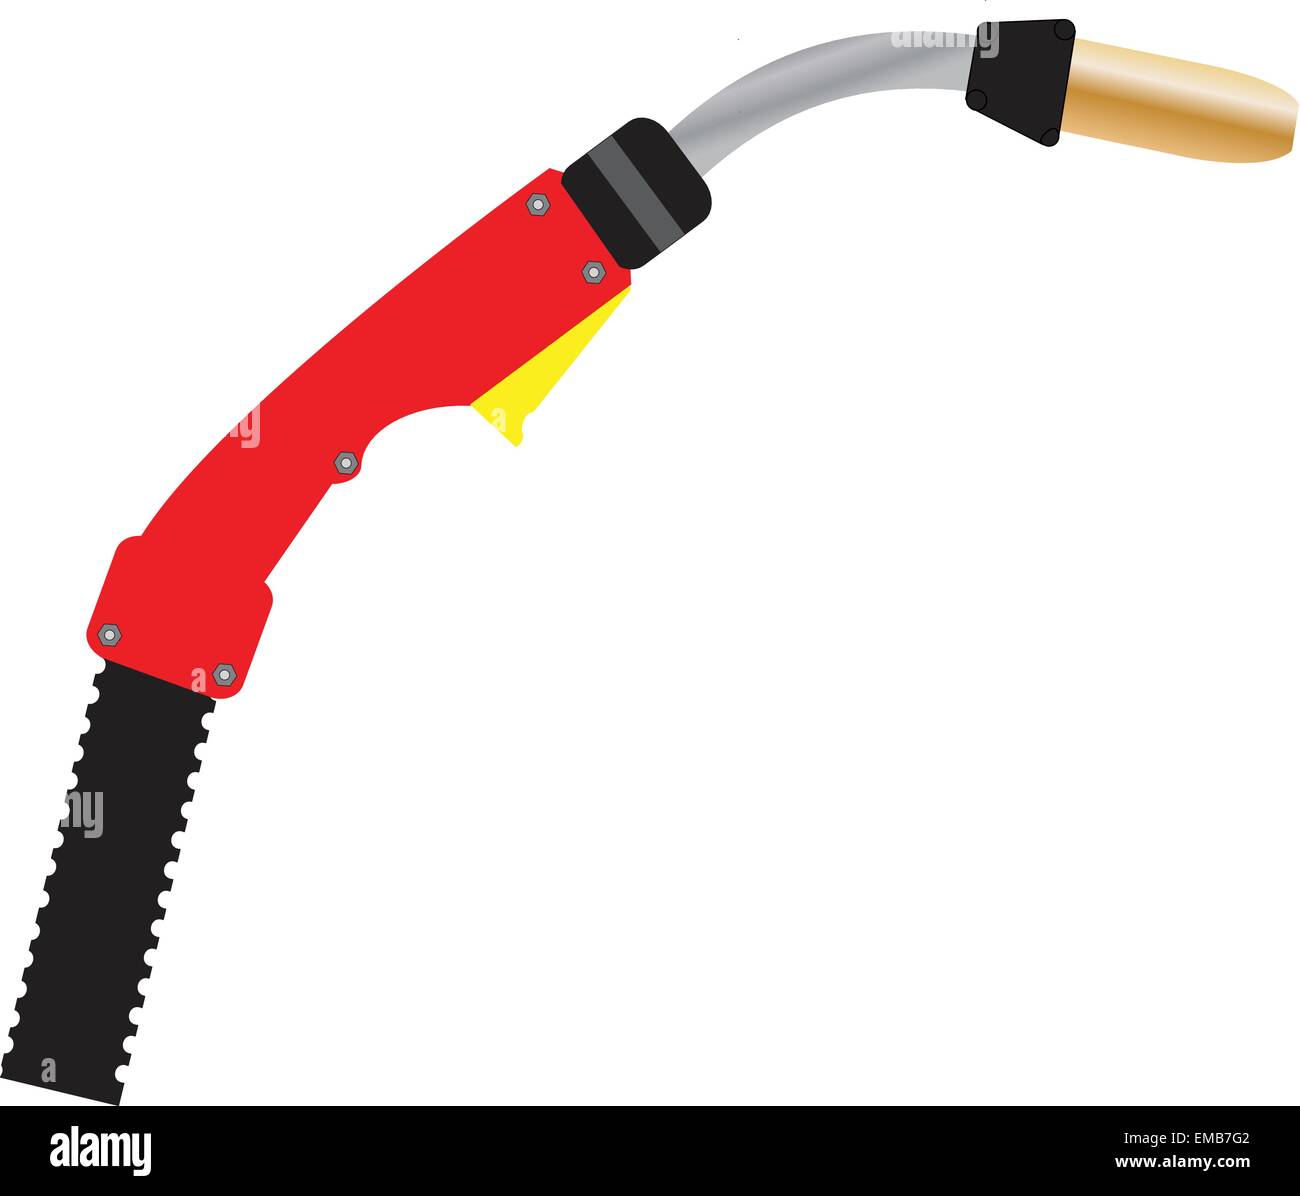 A Red and Yellow Mig Welding Torch isolated on White Stock Vector